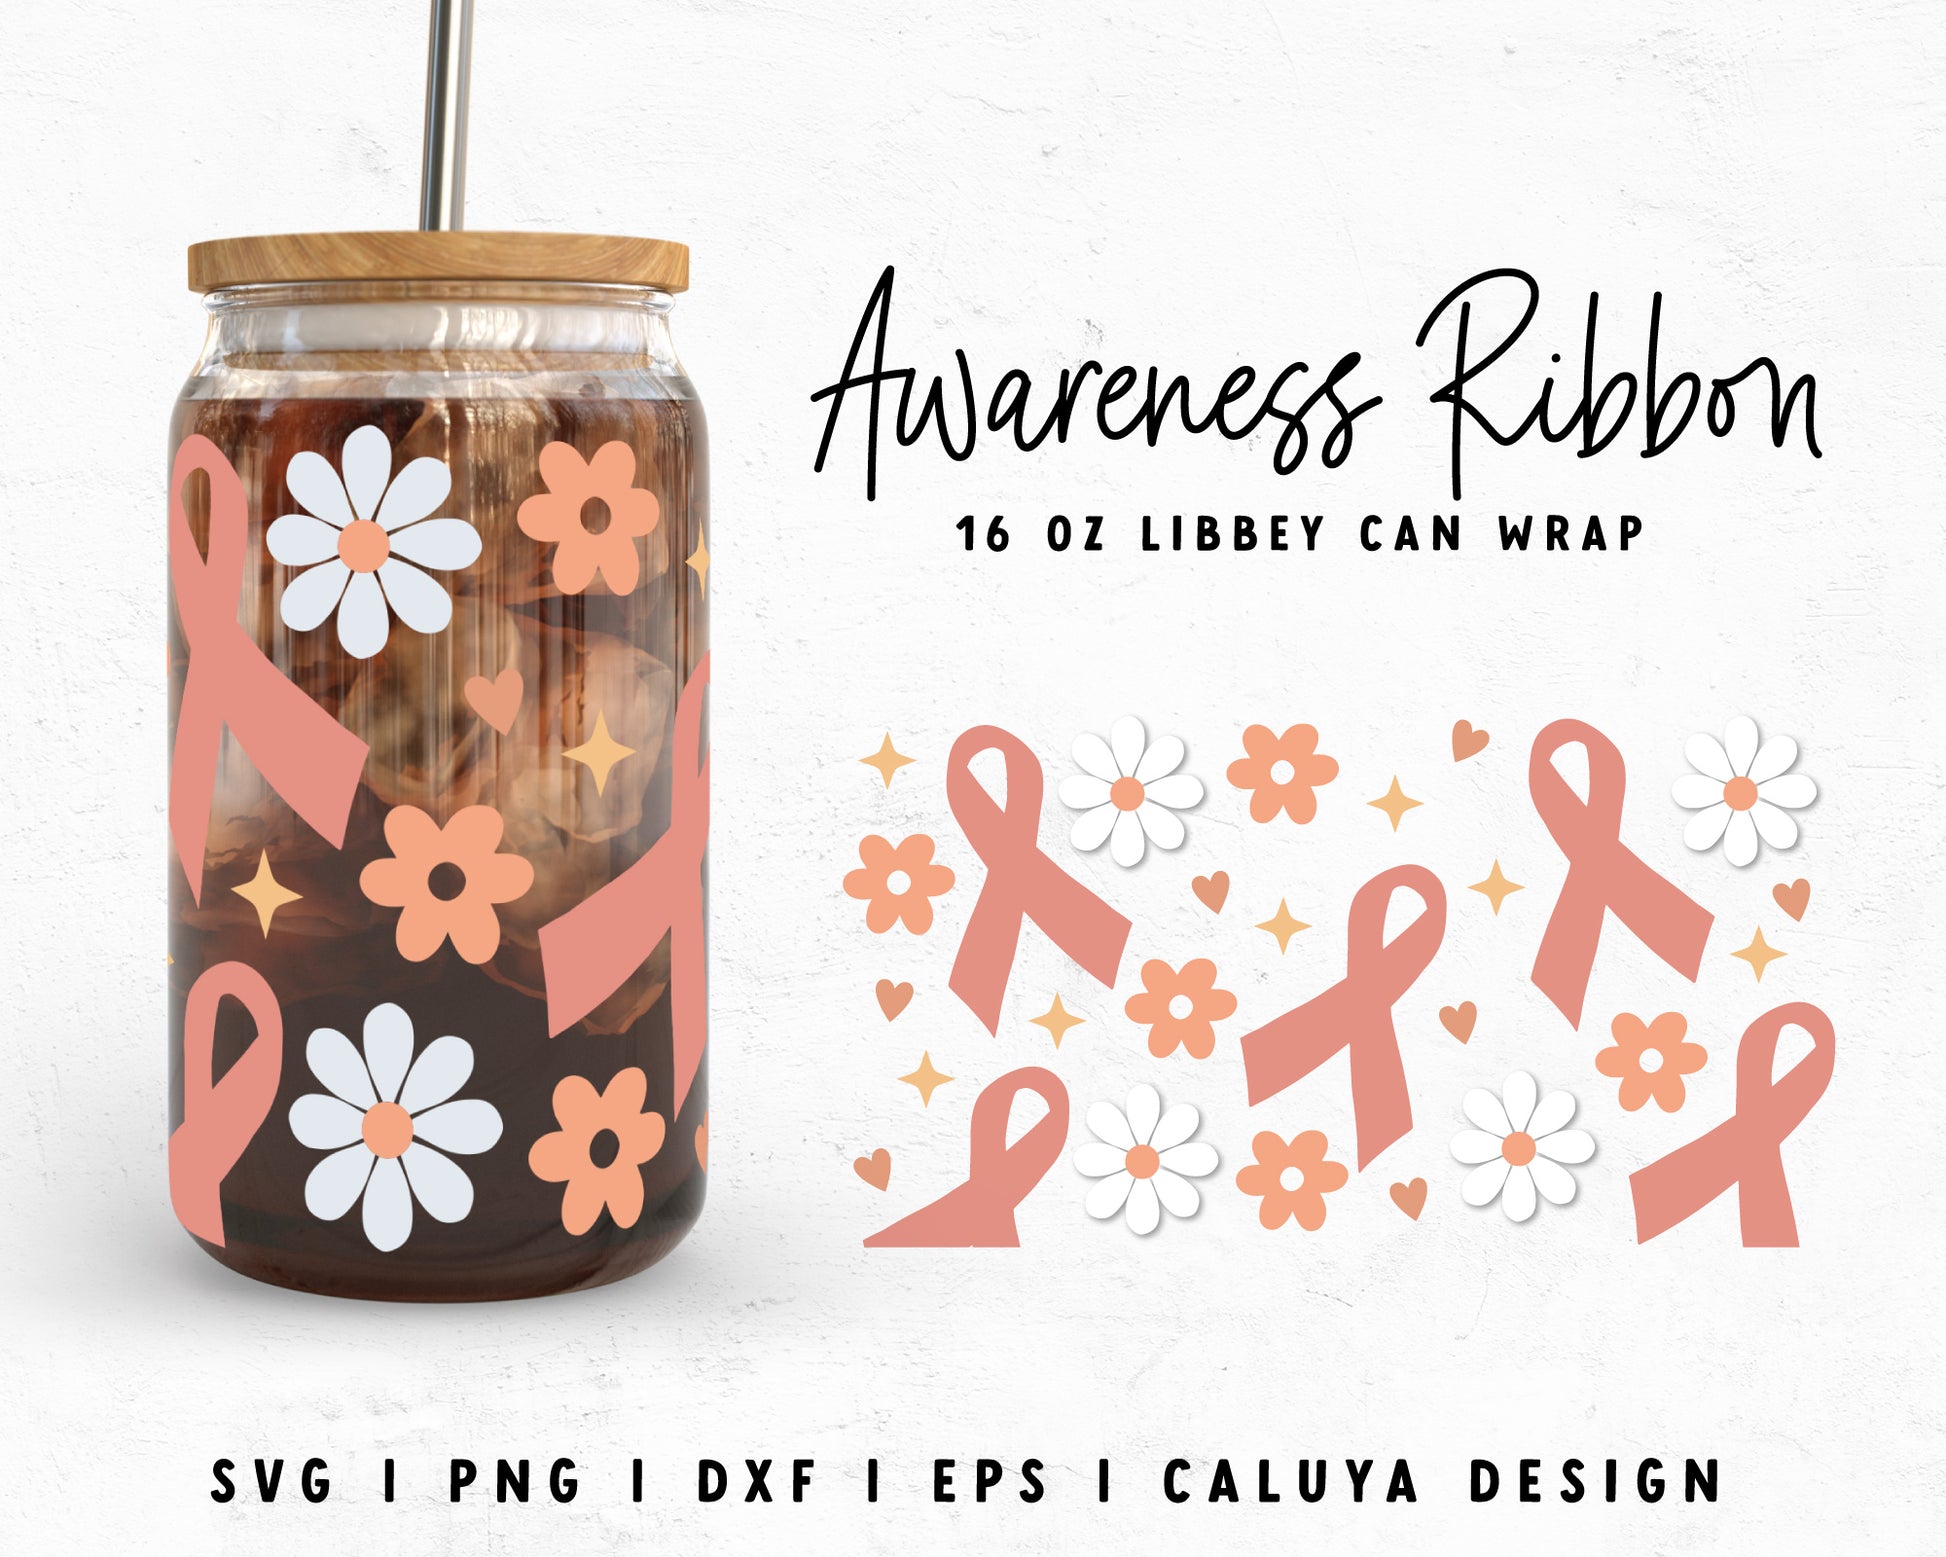 16oz Libbey Can Ribbons With Flowers Wrap Cut File for Cricut, Cameo Silhouette | Free SVG Cut File